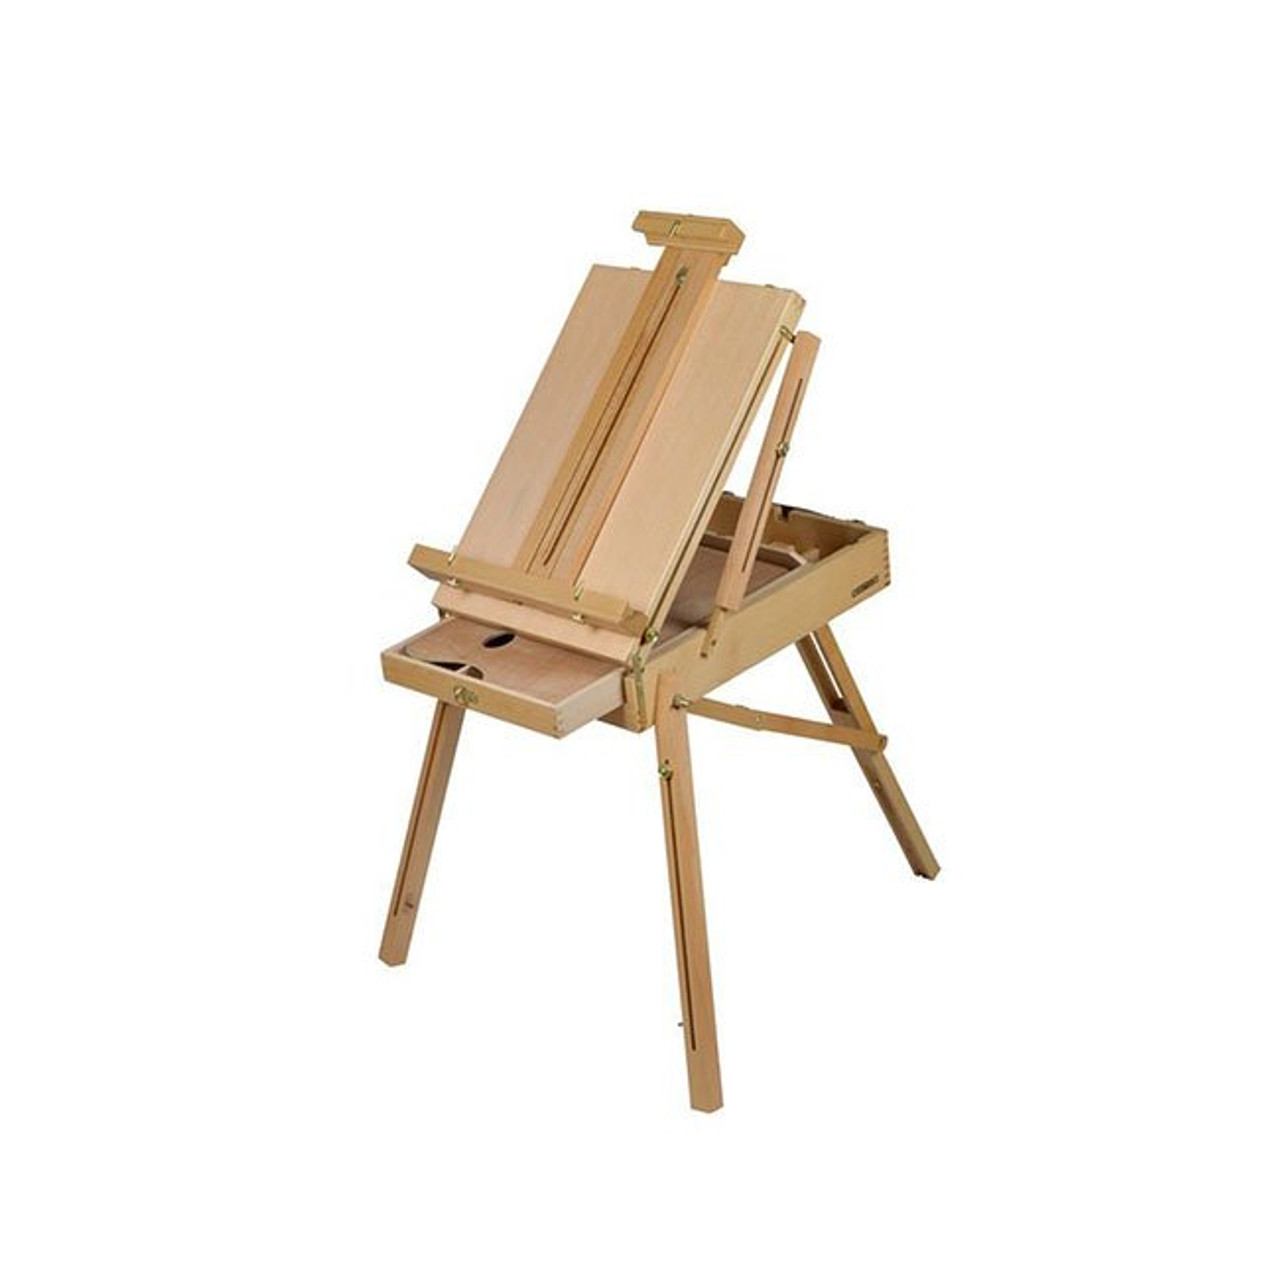 Bamboo Sonoma Sketch Box Easel, Full French Easel - 082435135021